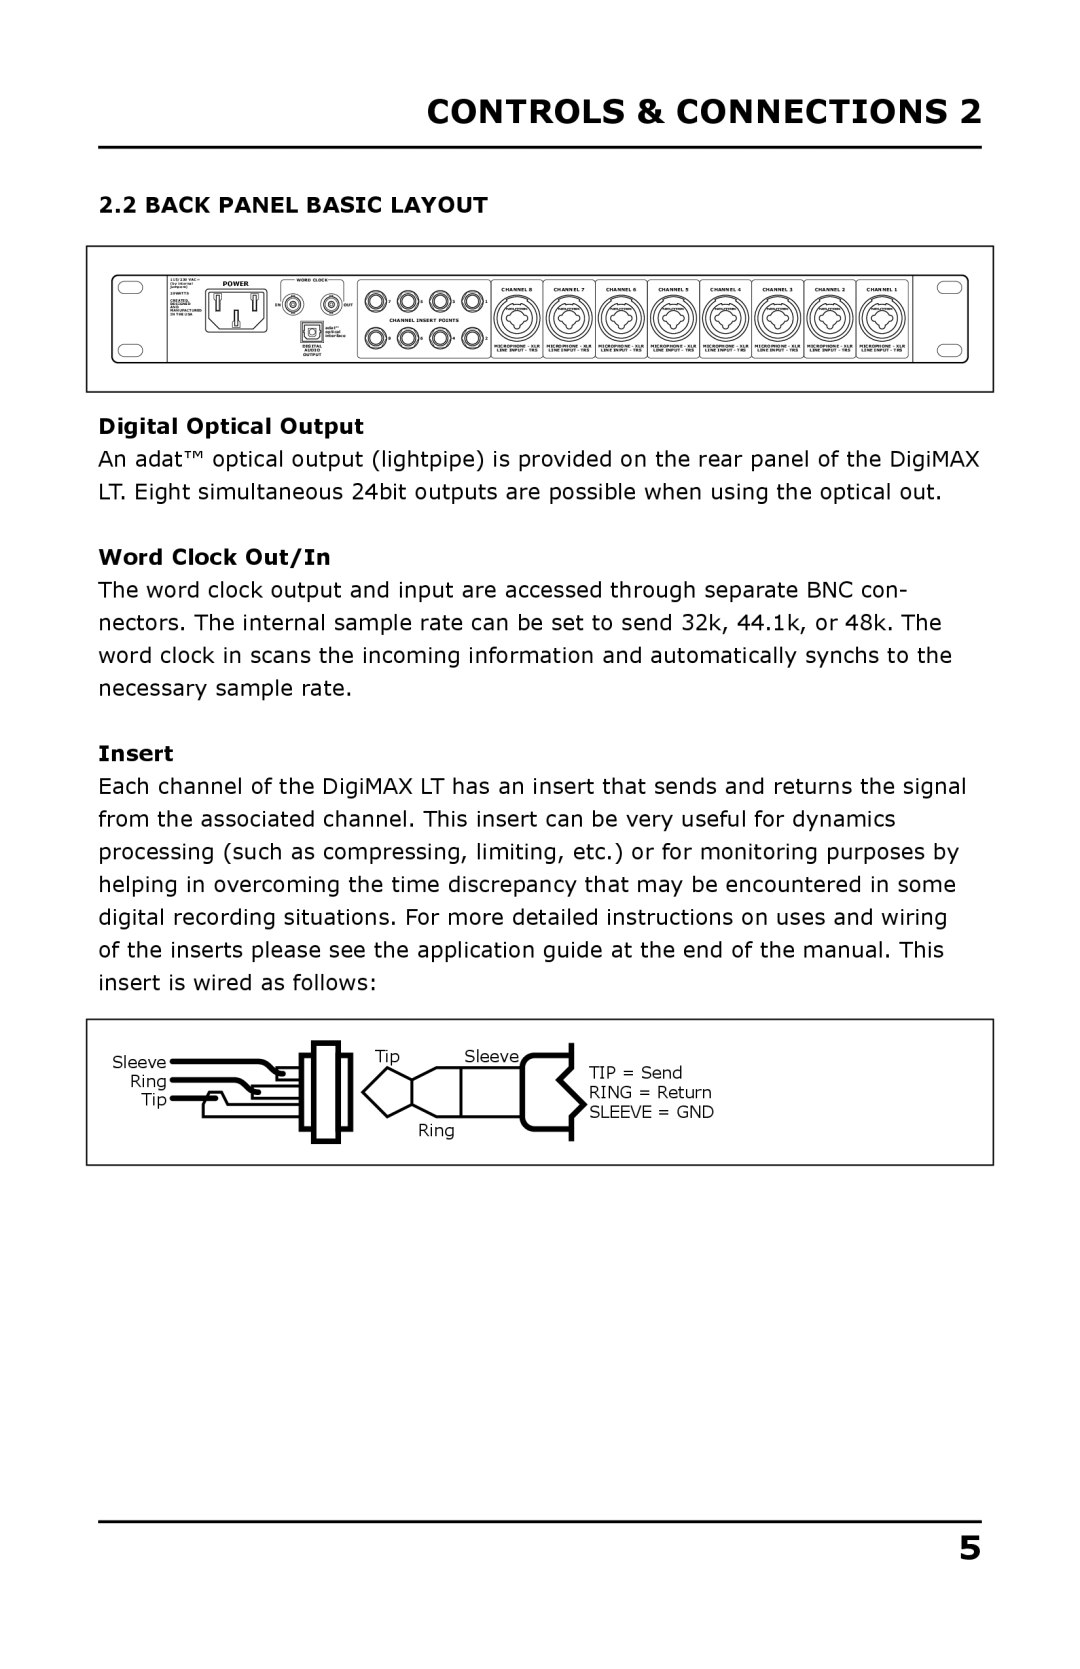 Presonus Audio electronic DigiMAX LT user manual Back Panel Basic Layout, Word Clock Out/In, Insert, Controls & Connections 